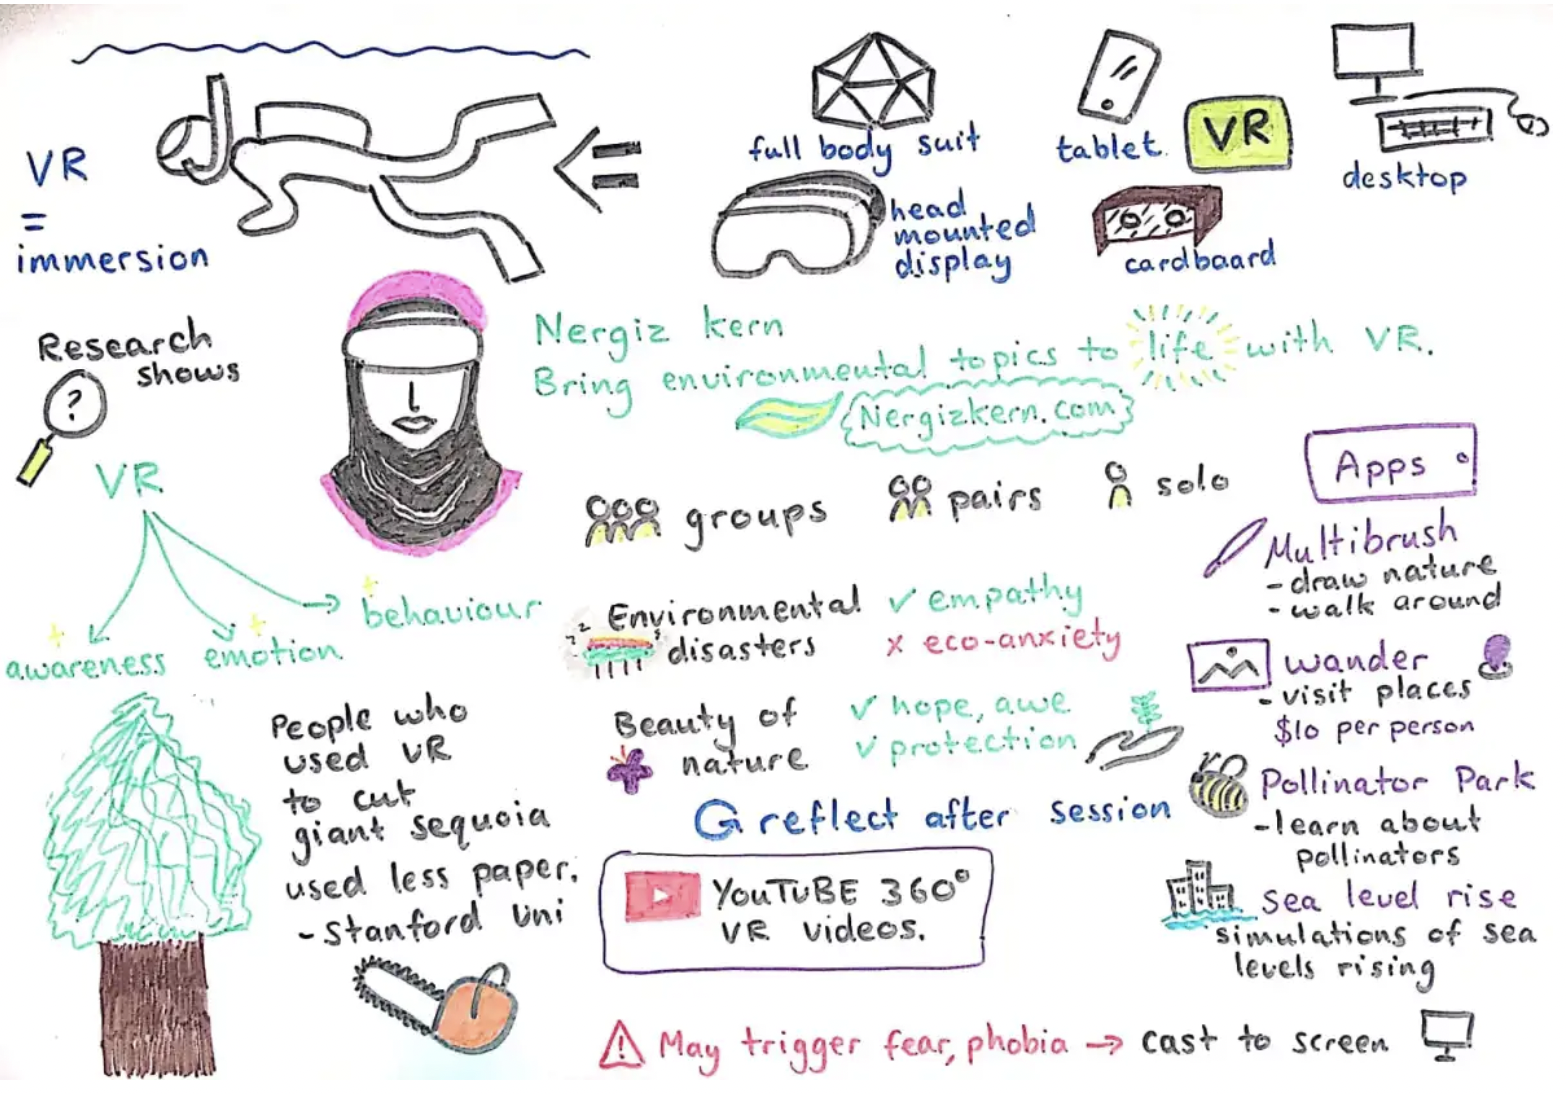 A sketch note of the conference talk 'Bring environmental topics to life with virtual reality